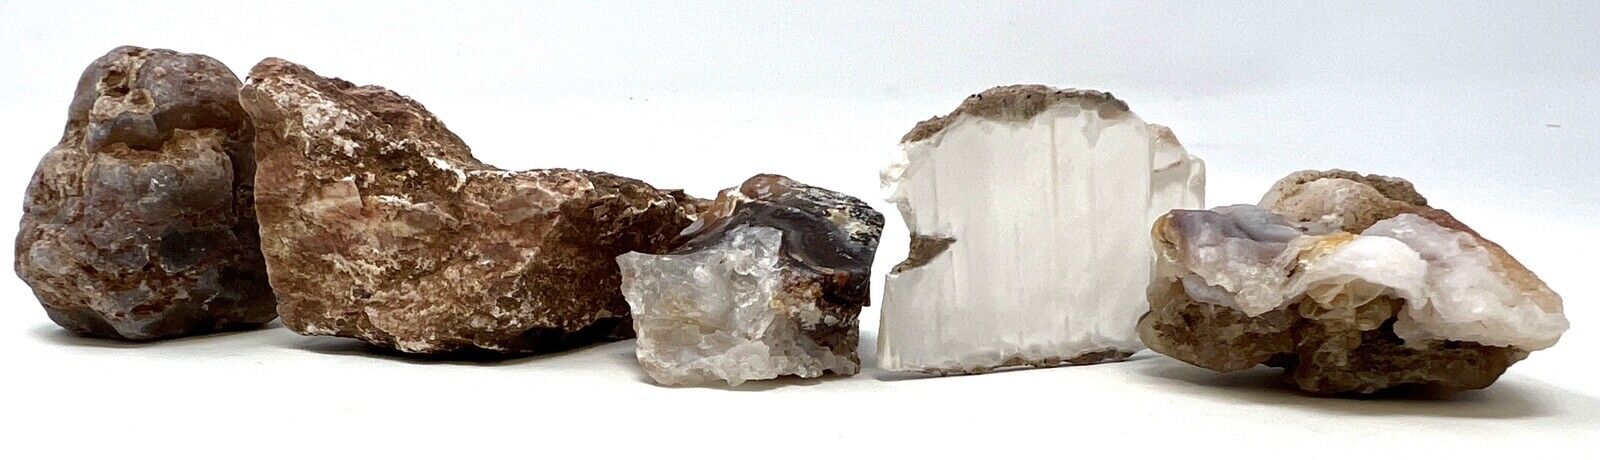 Loose Natural Stone - United States: Agate & Chalcedony 5pc Raw Lot 190g